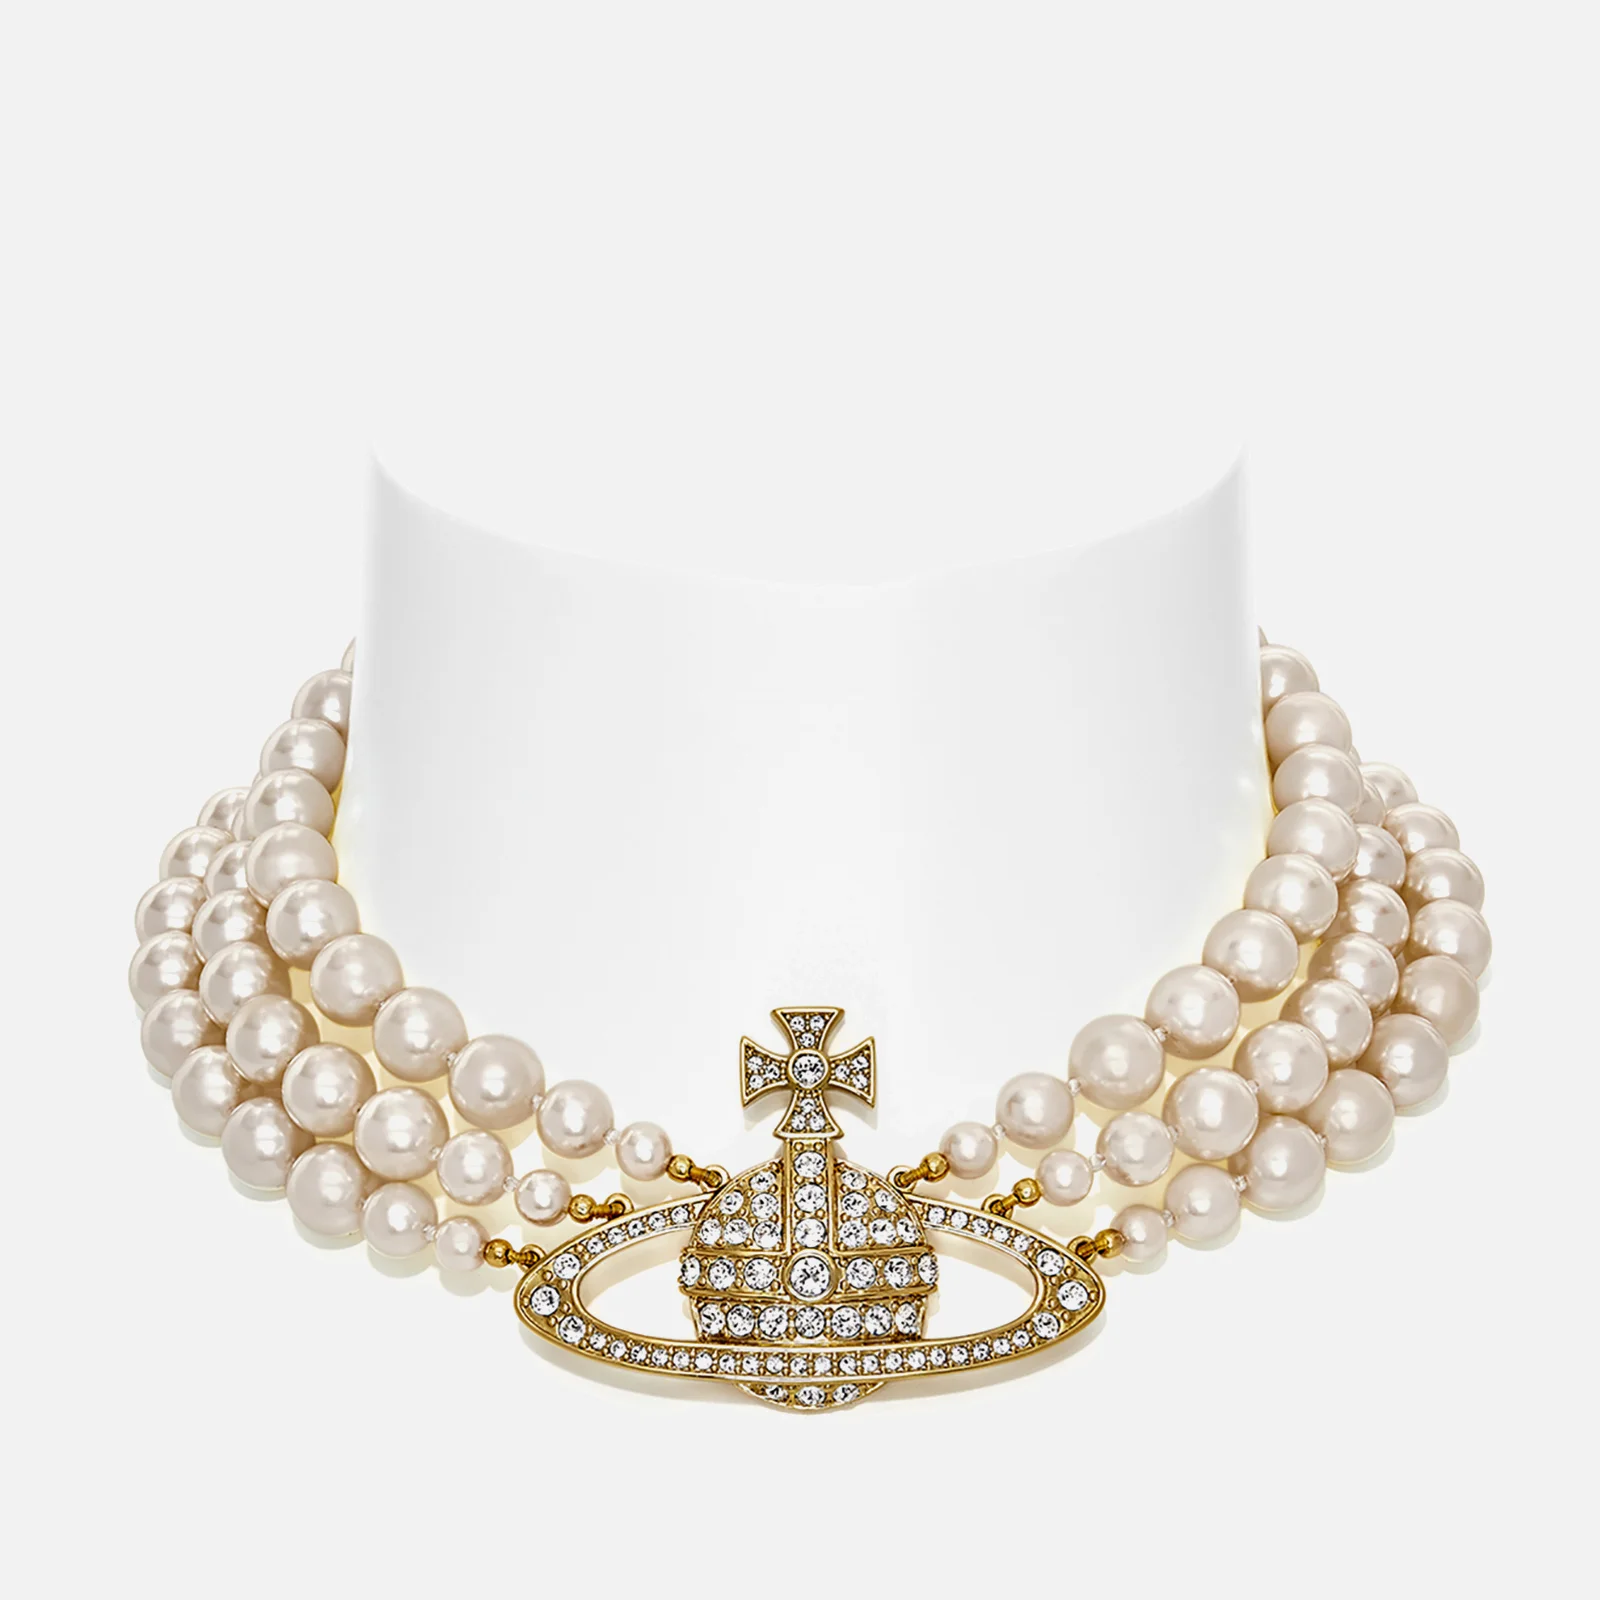 Vivienne Westwood Bas Relief Gold-Tone and Faux Pearl Choker Image 1